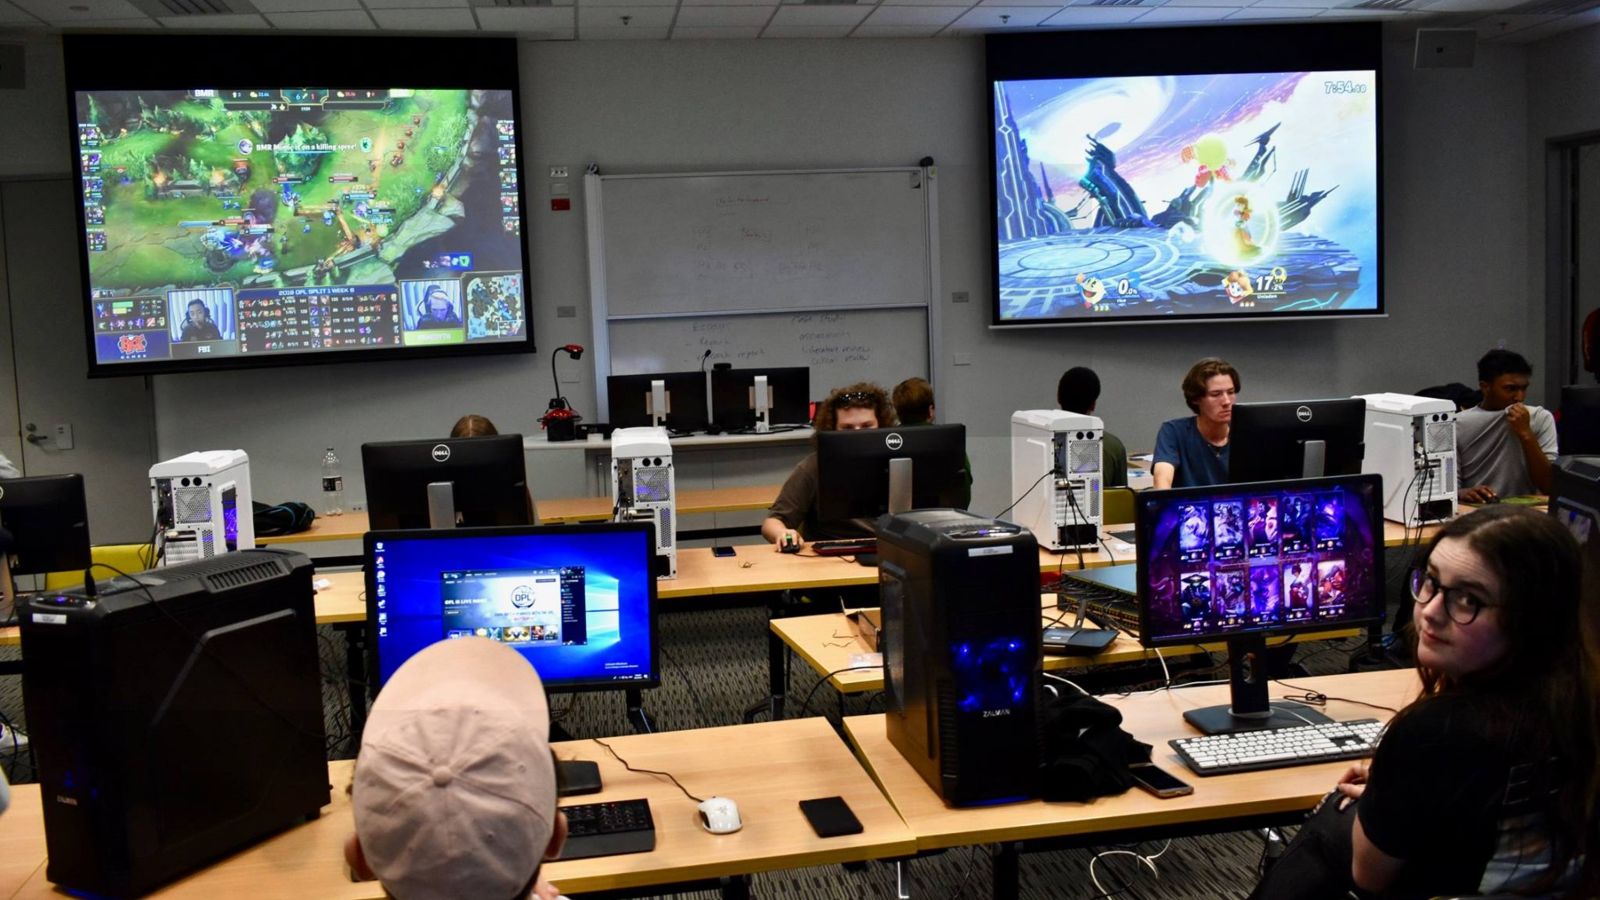 VESA event with students playing on computers, and Twitch streamers projected on large screens.